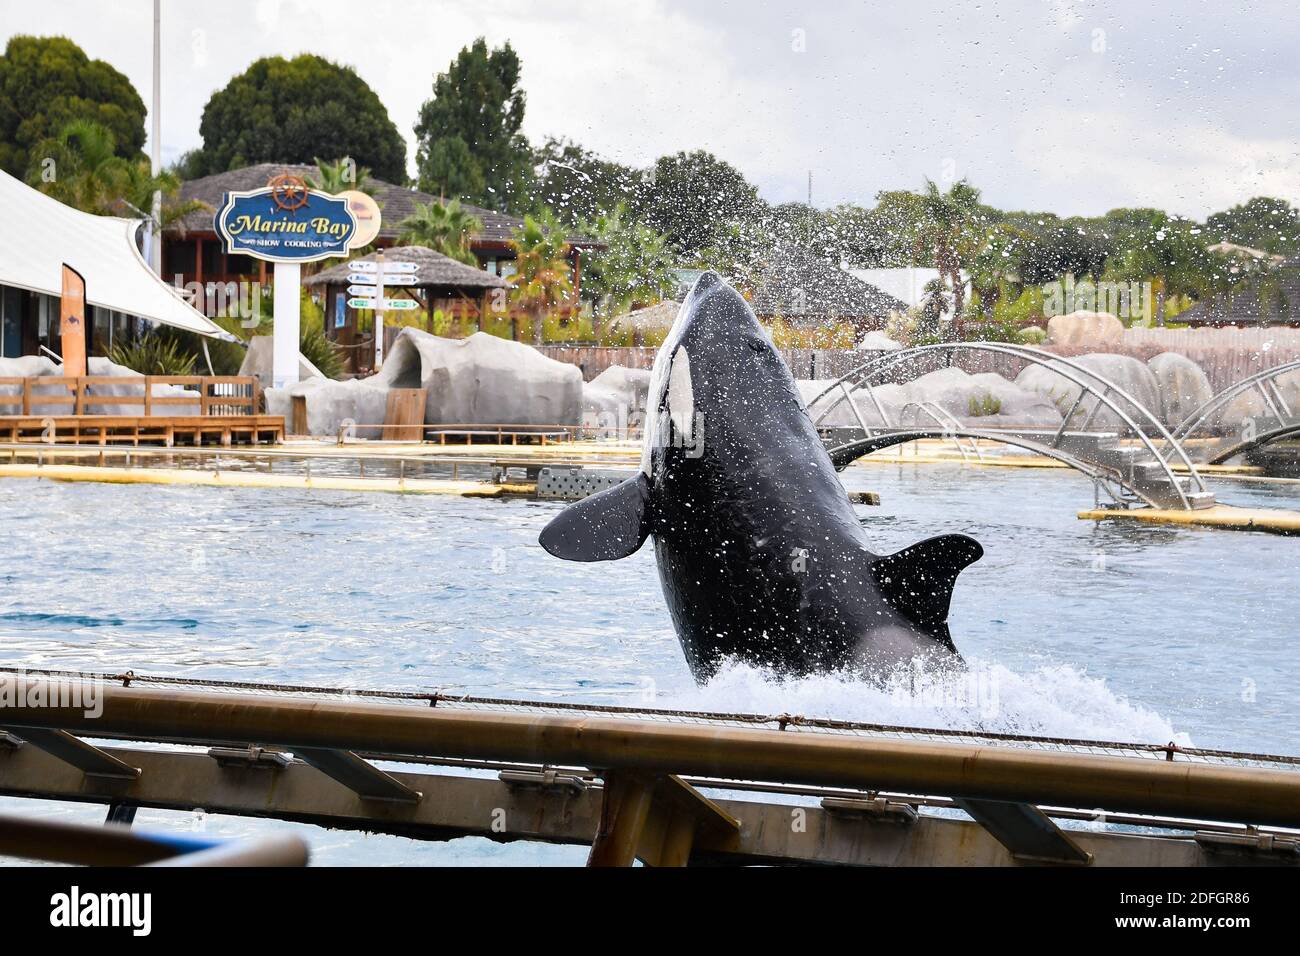 The Marineland is a theme park in Antibes (Alpes-Maritimes), in the French  Riviera. On 26 hectares it includes a marine zoological park with  dolphinarium, a water park (Aquasplash), a children's play park (